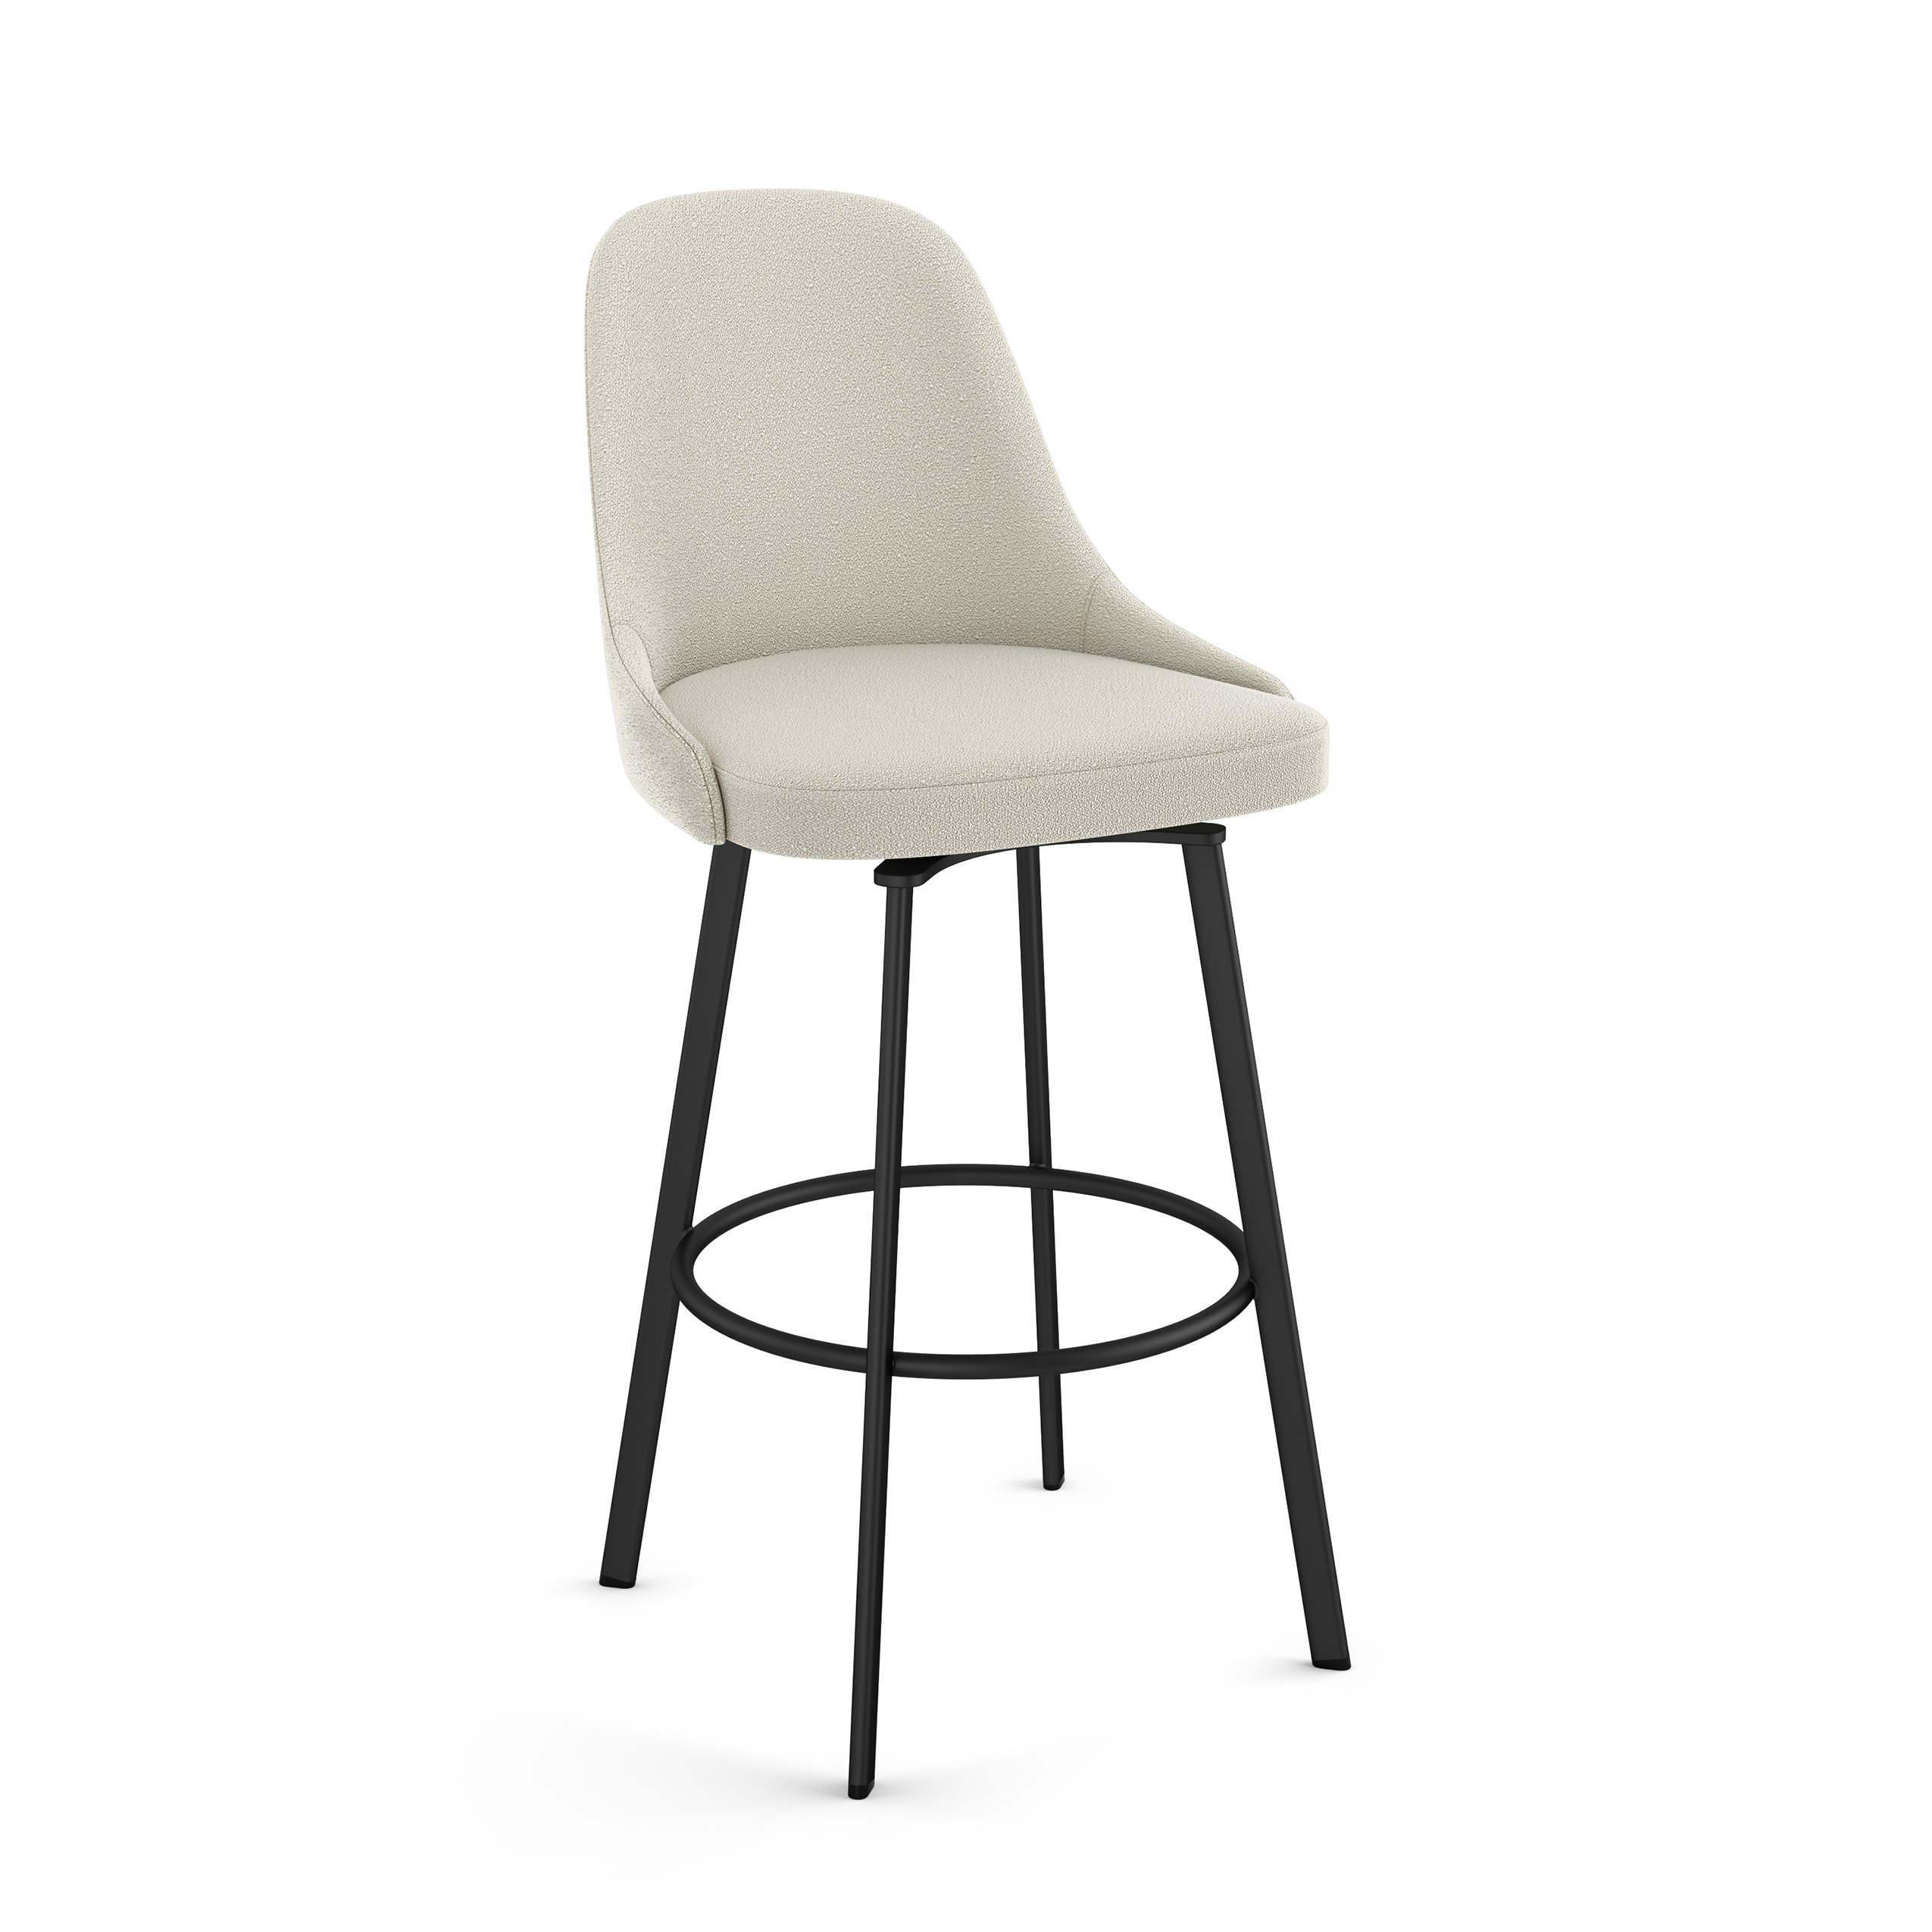 Off-white Bar Stools at Lowes.com